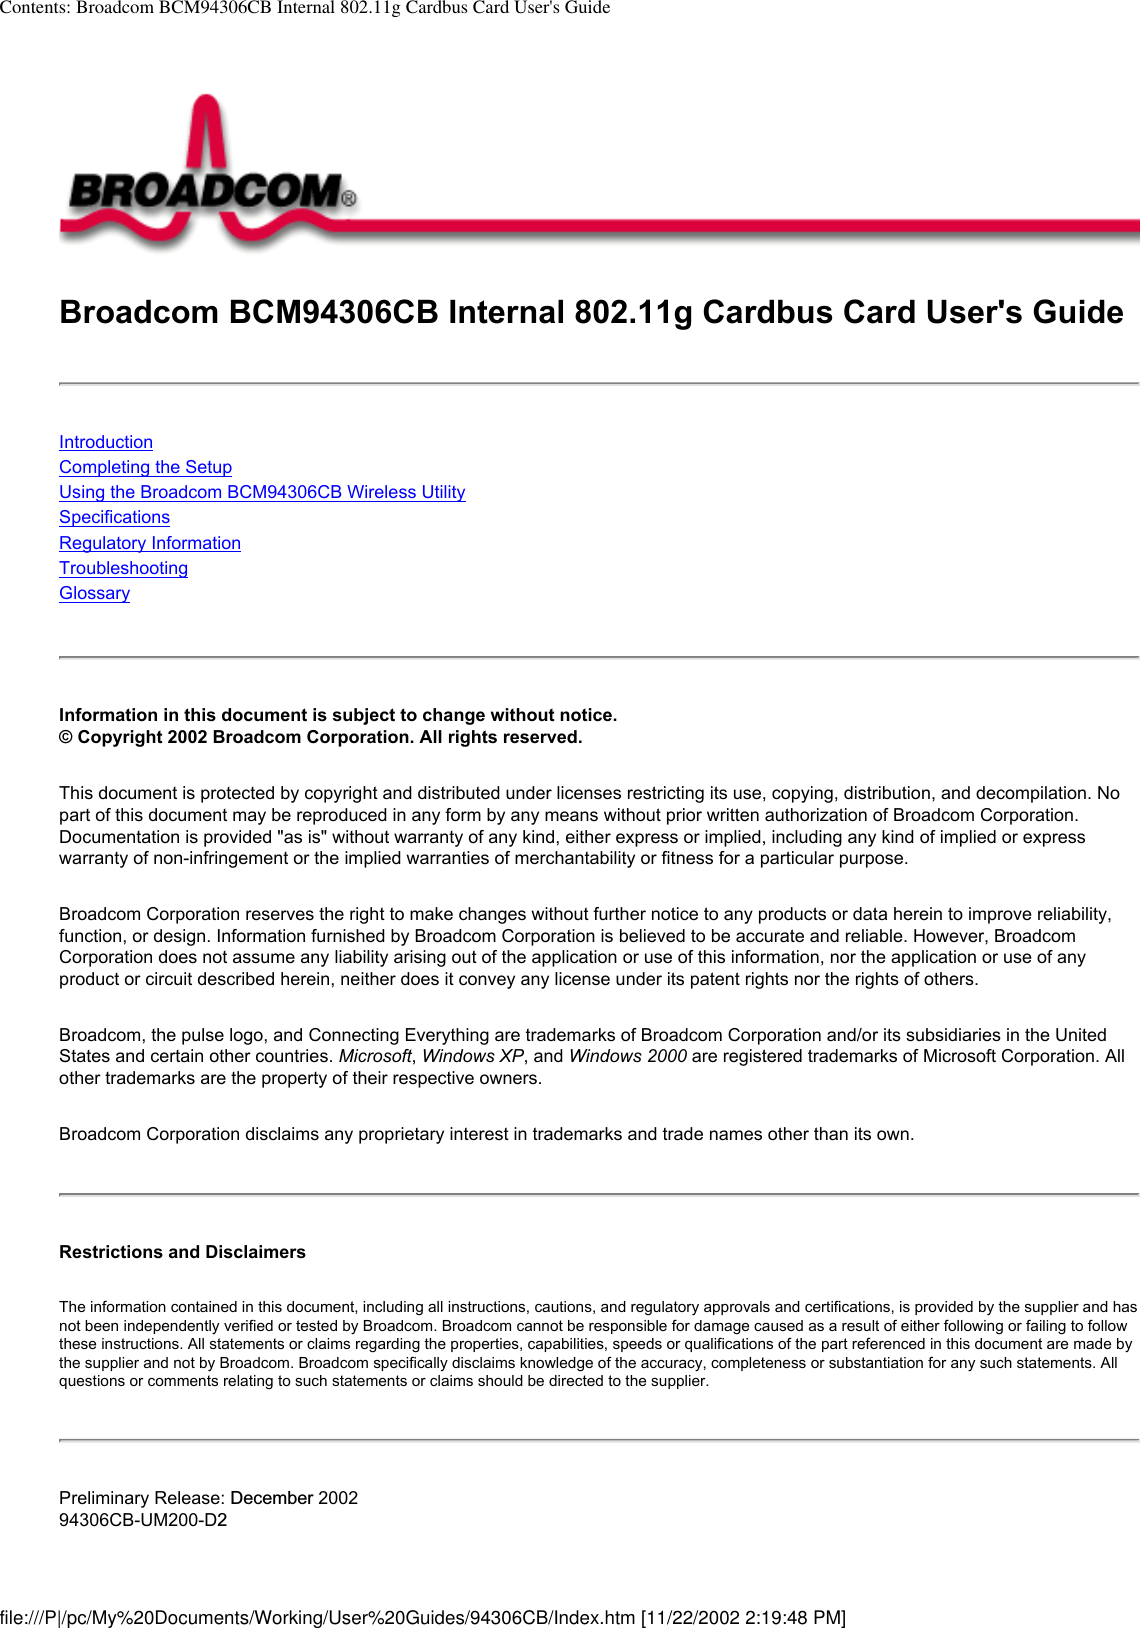 Contents: Broadcom BCM94306CB Internal 802.11g Cardbus Card User&apos;s GuideBroadcom BCM94306CB Internal 802.11g Cardbus Card User&apos;s GuideIntroductionCompleting the SetupUsing the Broadcom BCM94306CB Wireless UtilitySpecificationsRegulatory InformationTroubleshooting Glossary Information in this document is subject to change without notice.© Copyright 2002 Broadcom Corporation. All rights reserved. This document is protected by copyright and distributed under licenses restricting its use, copying, distribution, and decompilation. No part of this document may be reproduced in any form by any means without prior written authorization of Broadcom Corporation. Documentation is provided &quot;as is&quot; without warranty of any kind, either express or implied, including any kind of implied or express warranty of non-infringement or the implied warranties of merchantability or fitness for a particular purpose. Broadcom Corporation reserves the right to make changes without further notice to any products or data herein to improve reliability, function, or design. Information furnished by Broadcom Corporation is believed to be accurate and reliable. However, Broadcom Corporation does not assume any liability arising out of the application or use of this information, nor the application or use of any product or circuit described herein, neither does it convey any license under its patent rights nor the rights of others. Broadcom, the pulse logo, and Connecting Everything are trademarks of Broadcom Corporation and/or its subsidiaries in the United States and certain other countries. Microsoft, Windows XP, and Windows 2000 are registered trademarks of Microsoft Corporation. All other trademarks are the property of their respective owners. Broadcom Corporation disclaims any proprietary interest in trademarks and trade names other than its own. Restrictions and Disclaimers The information contained in this document, including all instructions, cautions, and regulatory approvals and certifications, is provided by the supplier and has not been independently verified or tested by Broadcom. Broadcom cannot be responsible for damage caused as a result of either following or failing to follow these instructions. All statements or claims regarding the properties, capabilities, speeds or qualifications of the part referenced in this document are made by the supplier and not by Broadcom. Broadcom specifically disclaims knowledge of the accuracy, completeness or substantiation for any such statements. All questions or comments relating to such statements or claims should be directed to the supplier. Preliminary Release: December 200294306CB-UM200-D2file:///P|/pc/My%20Documents/Working/User%20Guides/94306CB/Index.htm [11/22/2002 2:19:48 PM]